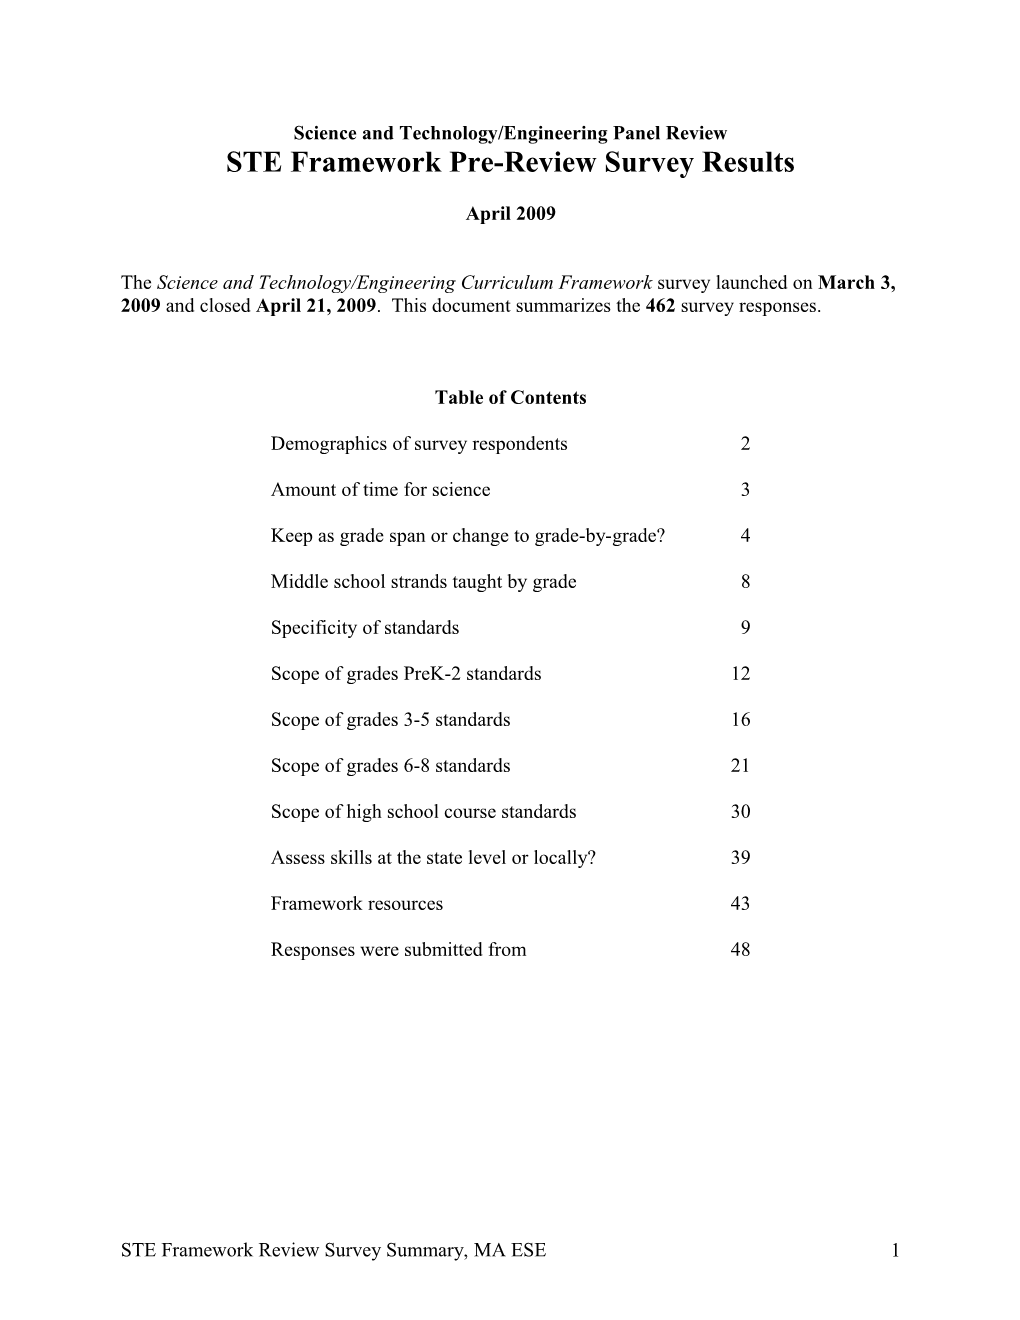 Science and Technology/Engineering Curriculum Framework Pre-Review Survey Report 2009